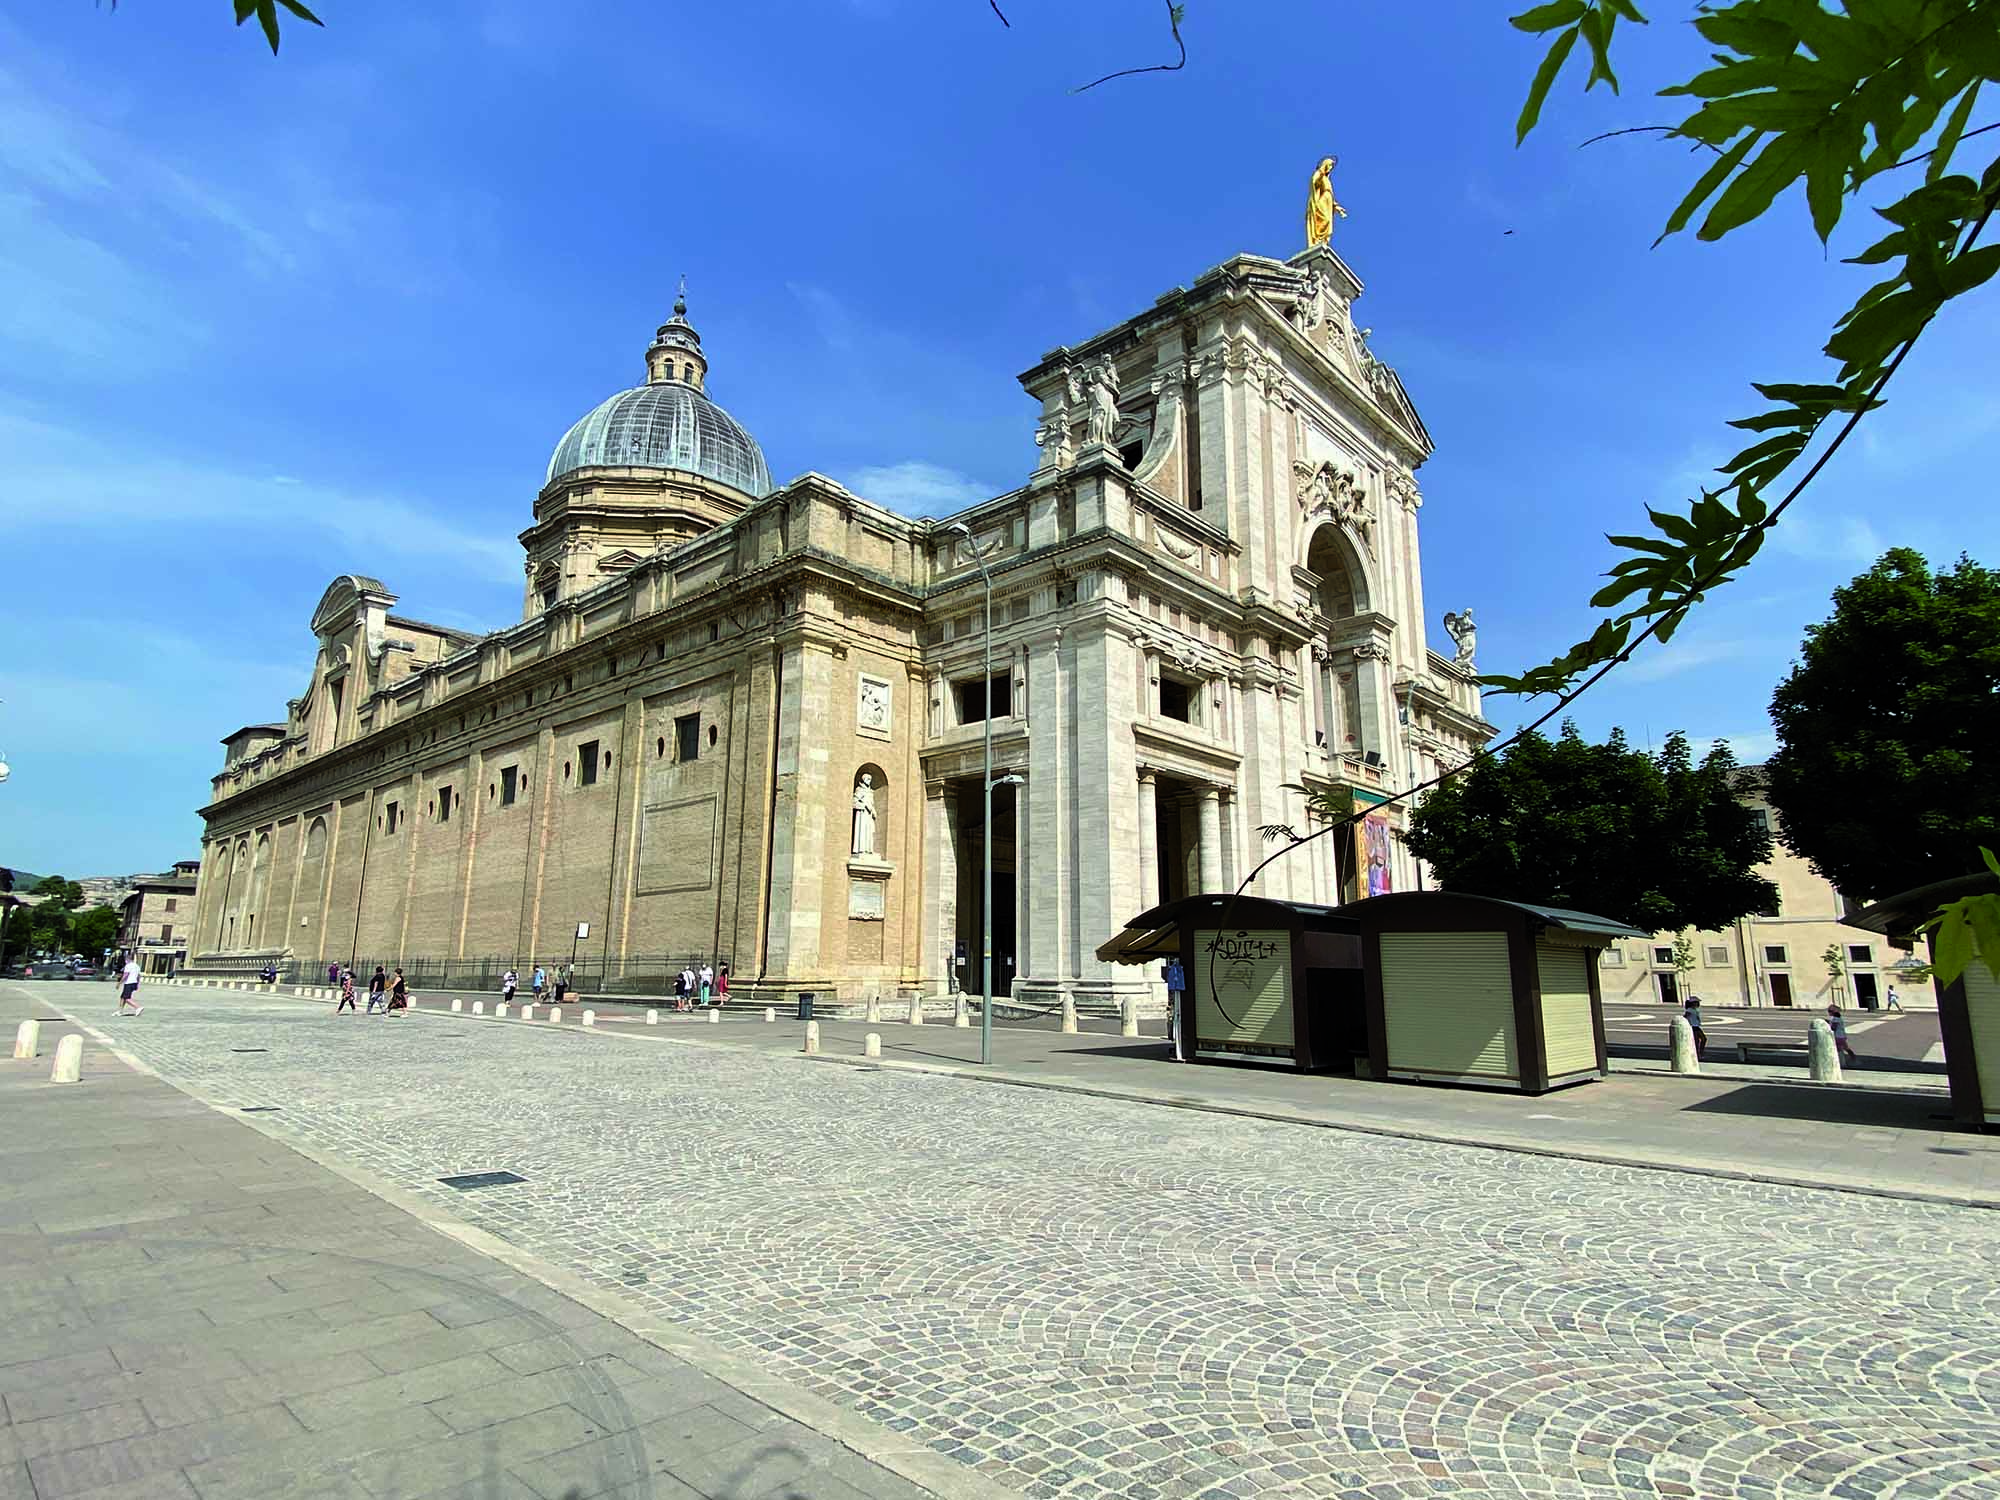 Mapestone System Mapei in Assisi Italy - The surface of the paving upon completion of the work.